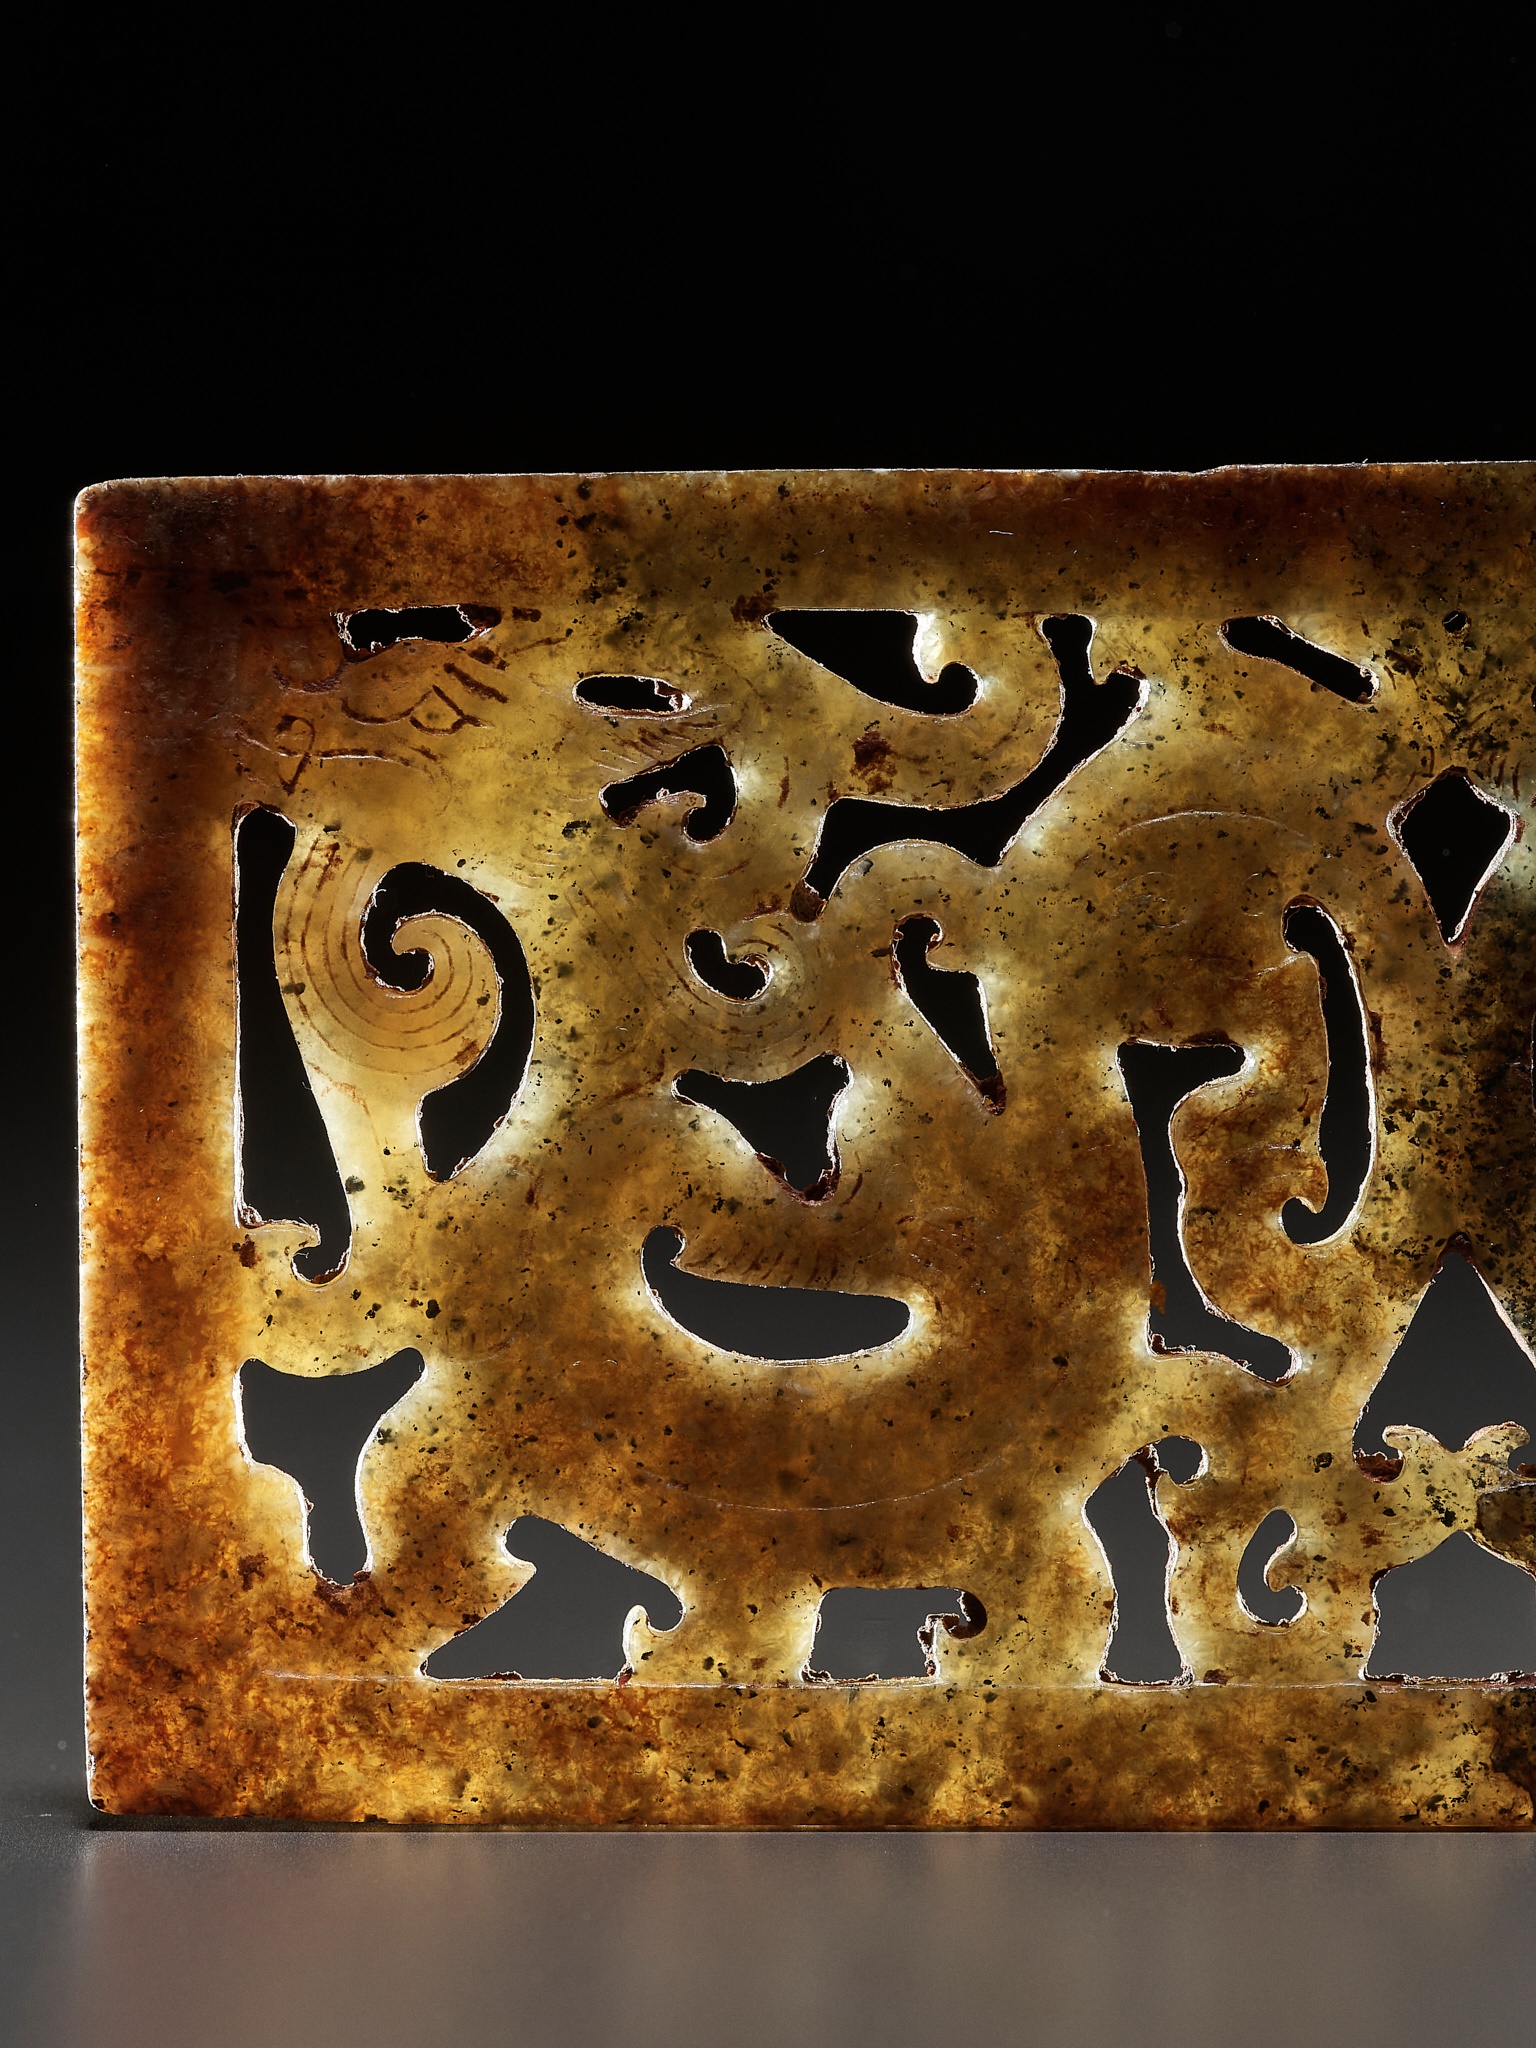 A RECTANGULAR GREEN JADE 'DOUBLE DRAGON' PLAQUE, LATE WARRING STATES PERIOD TO EARLY WESTERN HAN DYN - Image 8 of 12